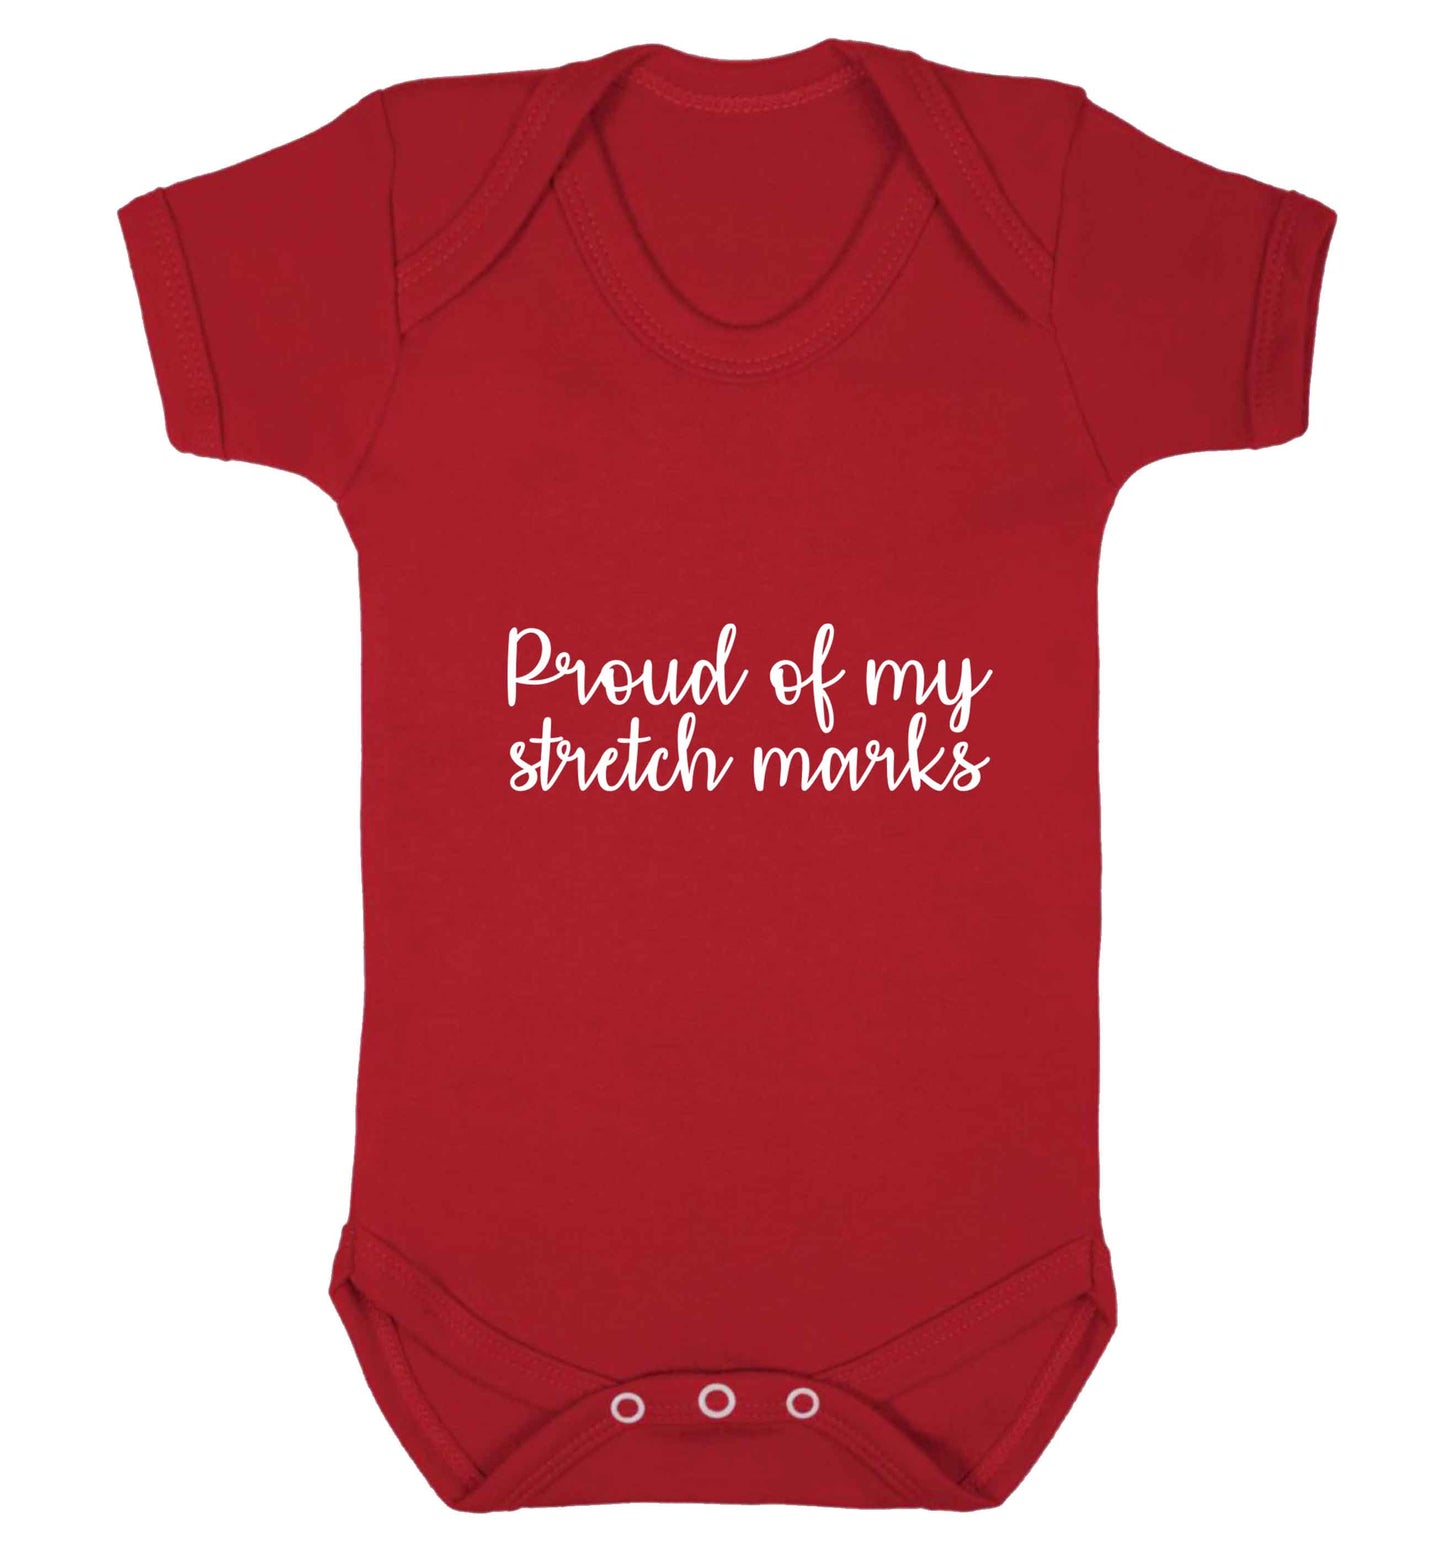 Proud of my stretch marks baby vest red 18-24 months